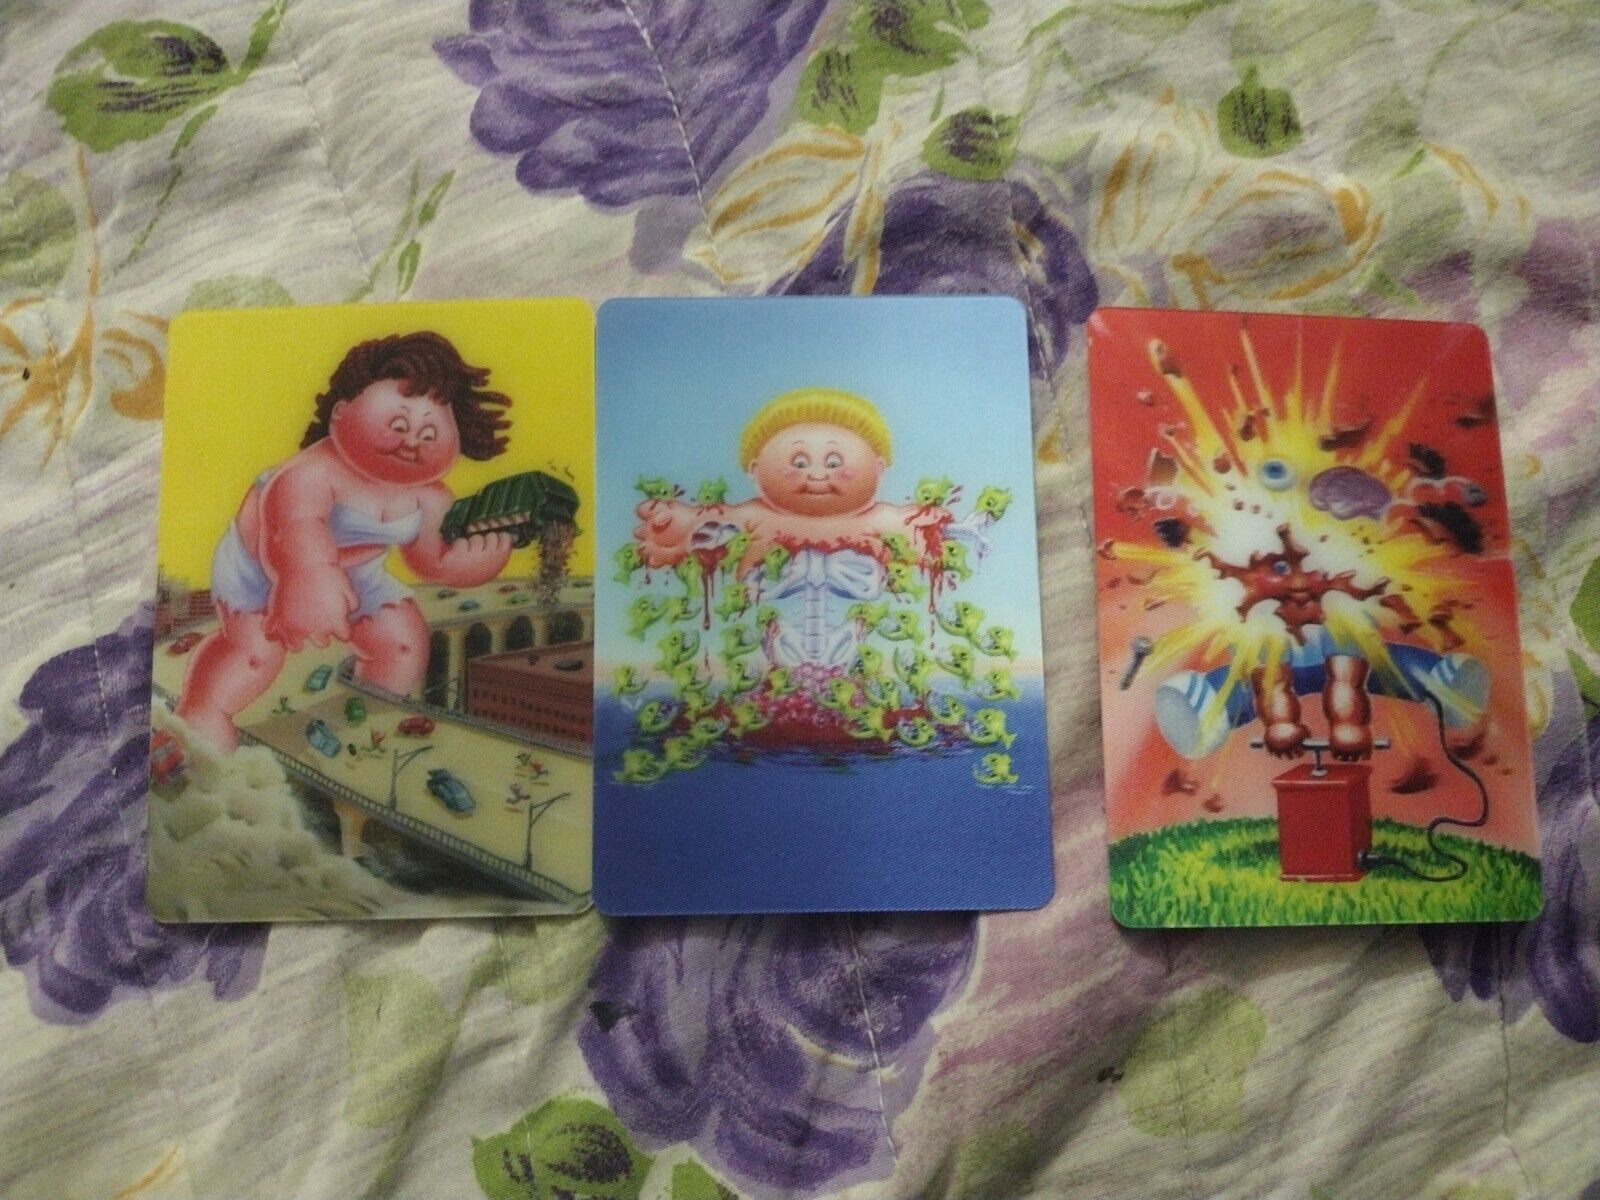 2013 Topps Garbage Pail Kids Brand-New Series 2 3D Dyna Mike #4 And 2 Bonus